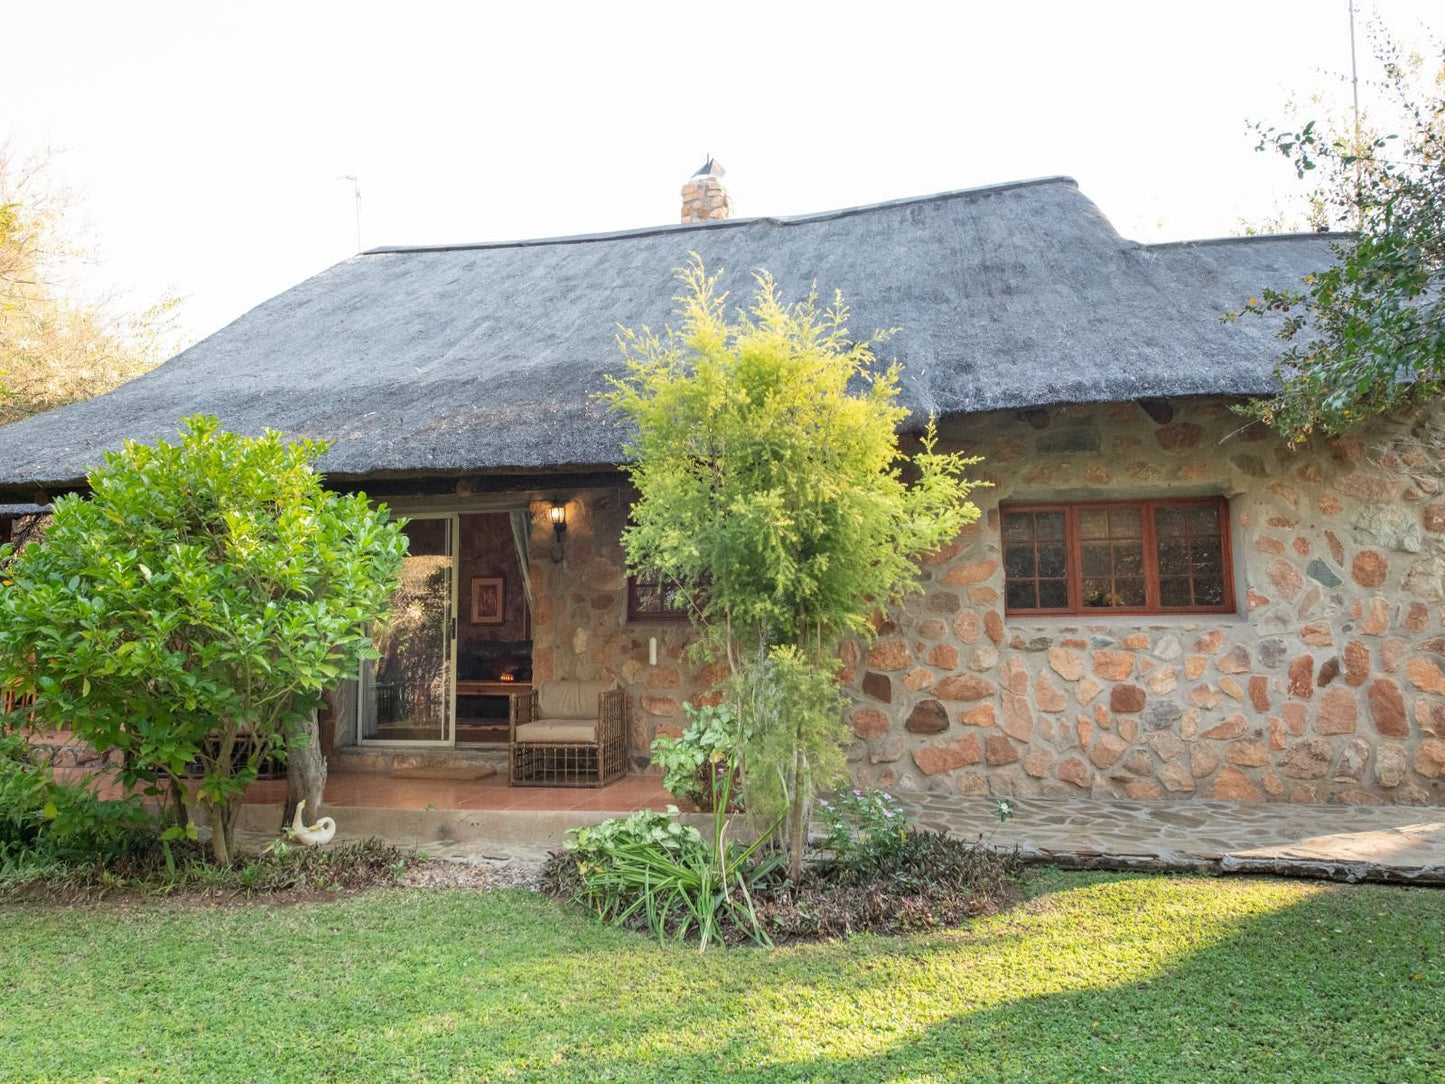 Blyde River Wilderness Lodge Blyde River Canyon Mpumalanga South Africa Building, Architecture, House